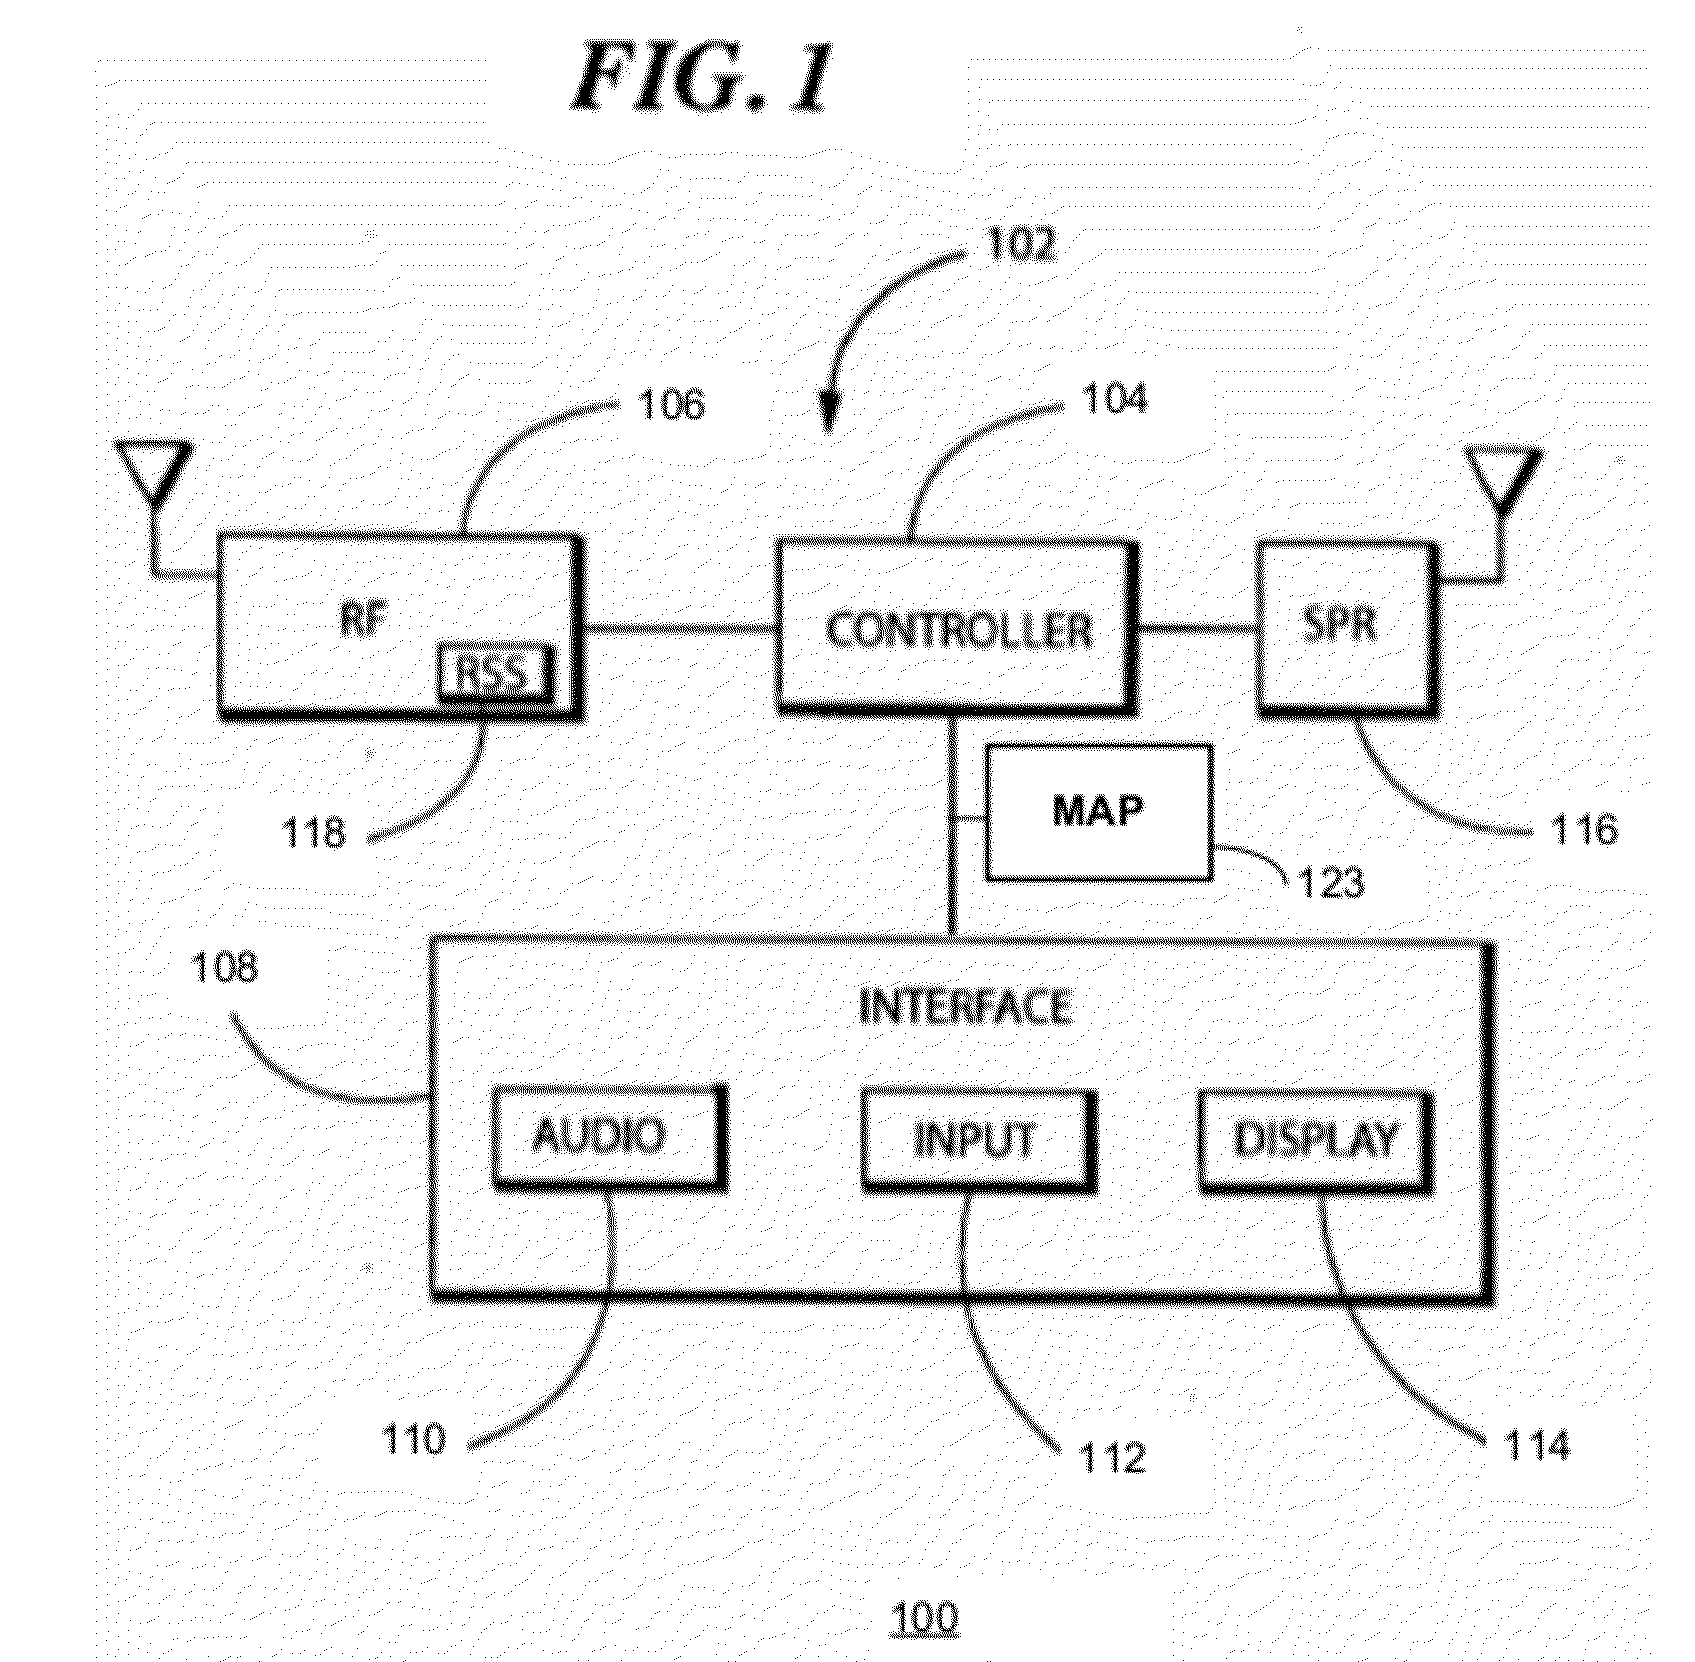 Systems and methods for selectively invoking positioning systems for mobile device control applications using multiple sensing modalities